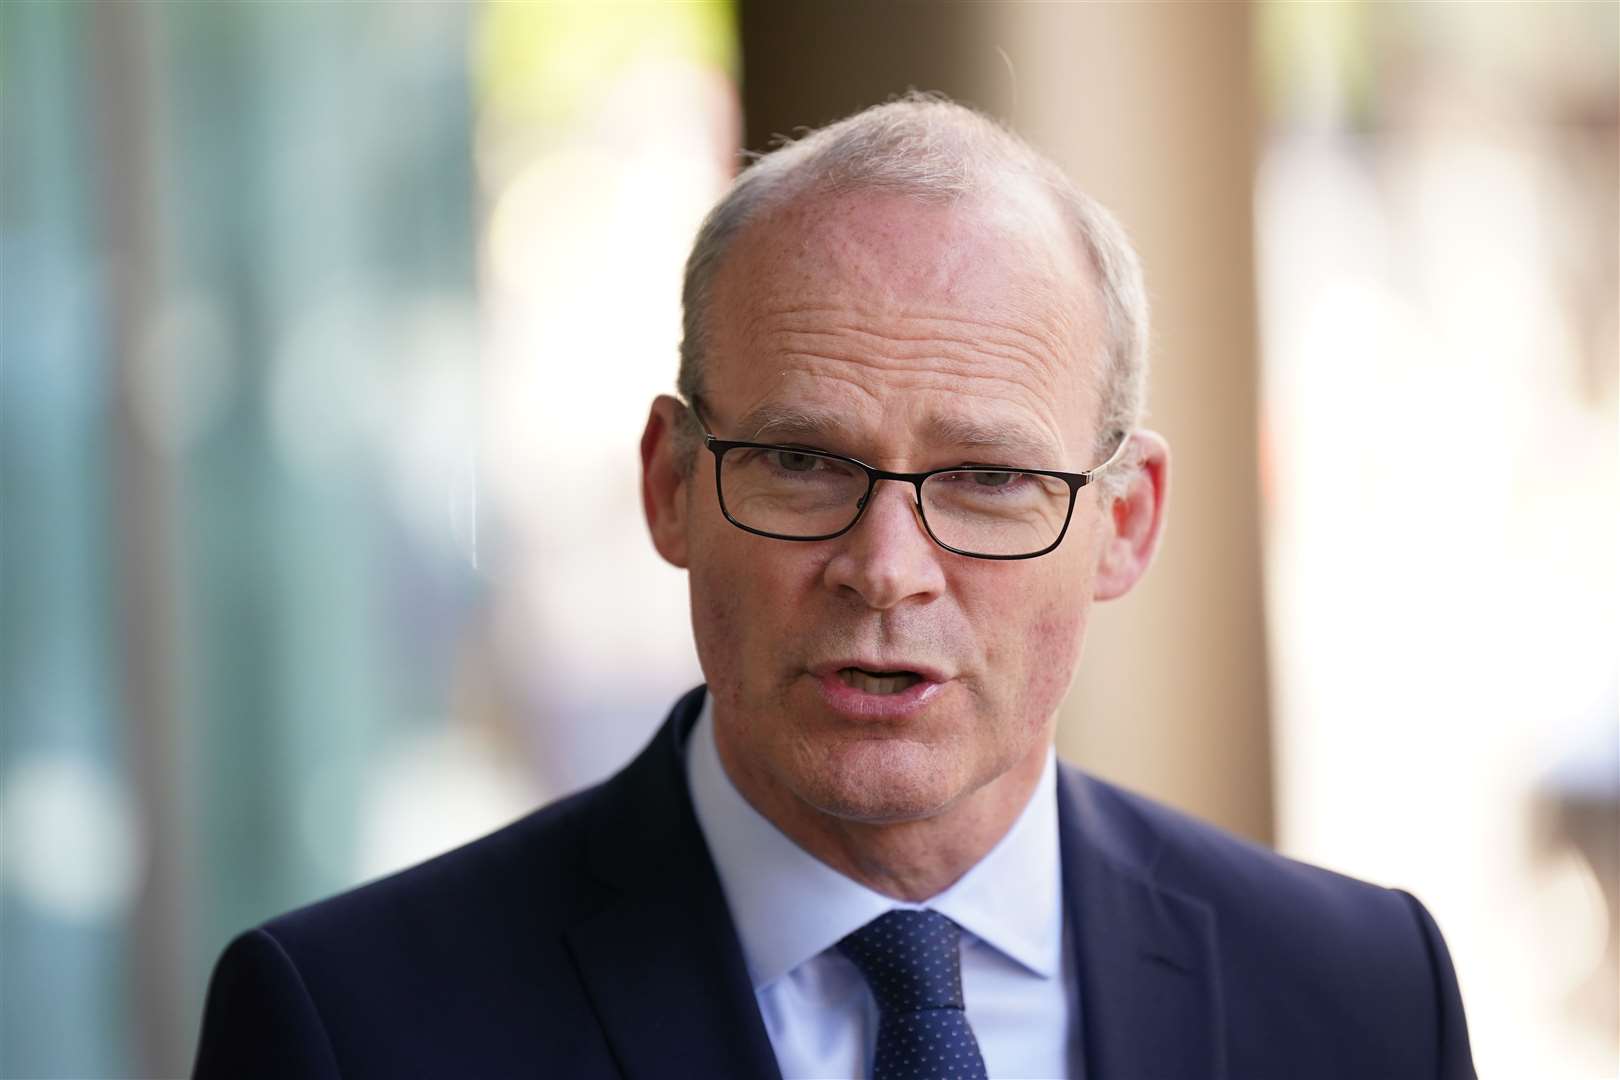 Ireland’s foreign affairs minister Simon Coveney said the unilateral action from the UK was ‘damaging to trust’ (Rebecca Black/PA)